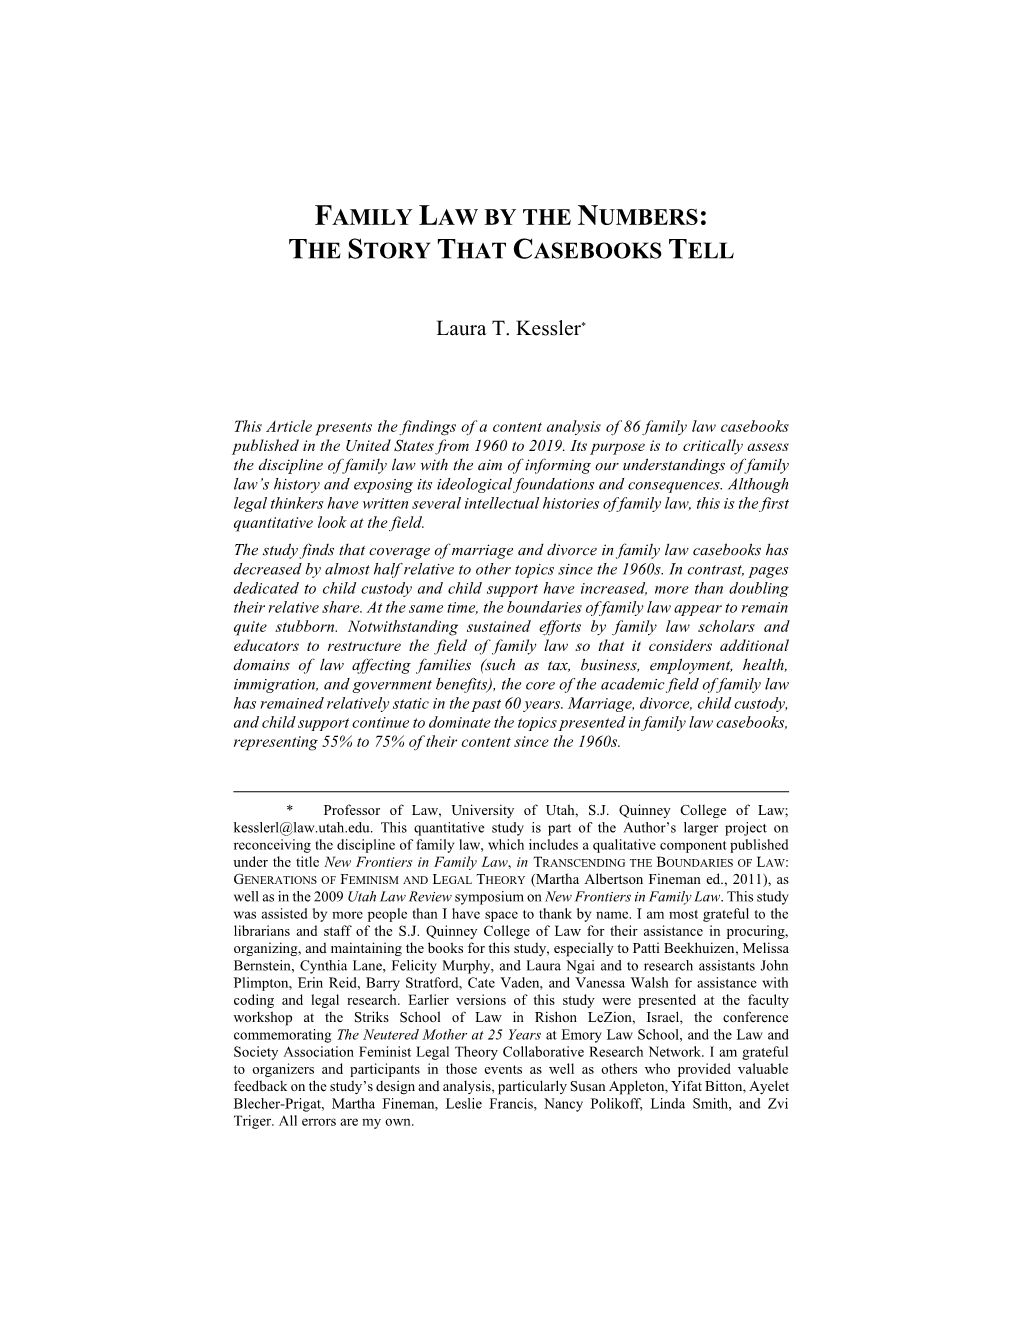 View Symposium on New Frontiers in Family Law